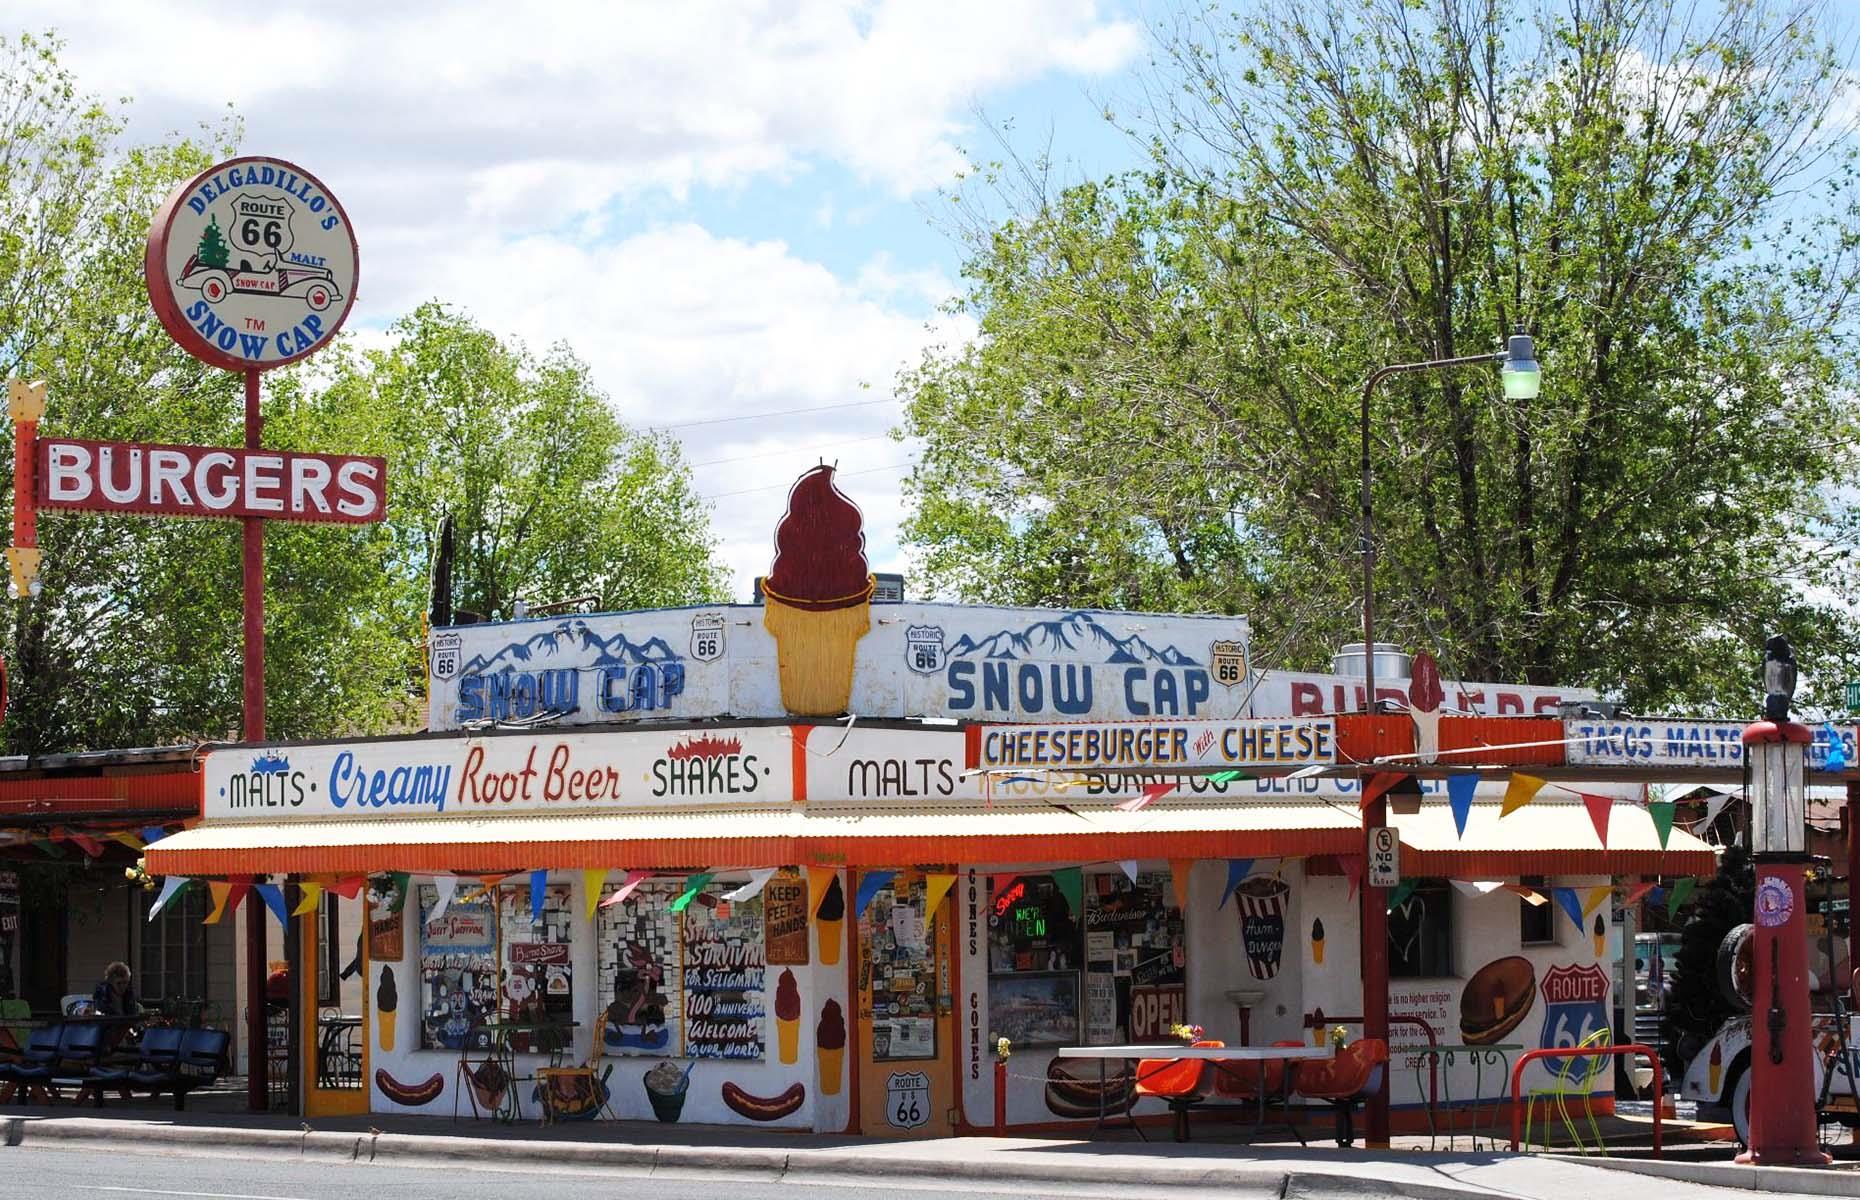 <p>This historic roadside stop on the former Route 66 in Seligman is a must-visit. It dates back <a href="http://john-delgadillo.squarespace.com/">to the 1950s</a>, is constructed from scrap wood and out the front is a 1936 Chevrolet hardtop decorated with <a href="https://thedyrt.com/magazine/lifestyle/guide-to-rv-road-tripping-along-route-66/">a Christmas tree</a>. Food-wise, the green chili burger, fries and a shake is <a href="https://www.yelp.com/biz/delgadillos-snow-cap-drive-in-seligman?q=green">what to order.</a> It has closed now for the season, but will reopen <a href="https://www.facebook.com/Delgadillos-Snow-Cap-419894931438847/?ref=page_internal">next spring.</a></p>